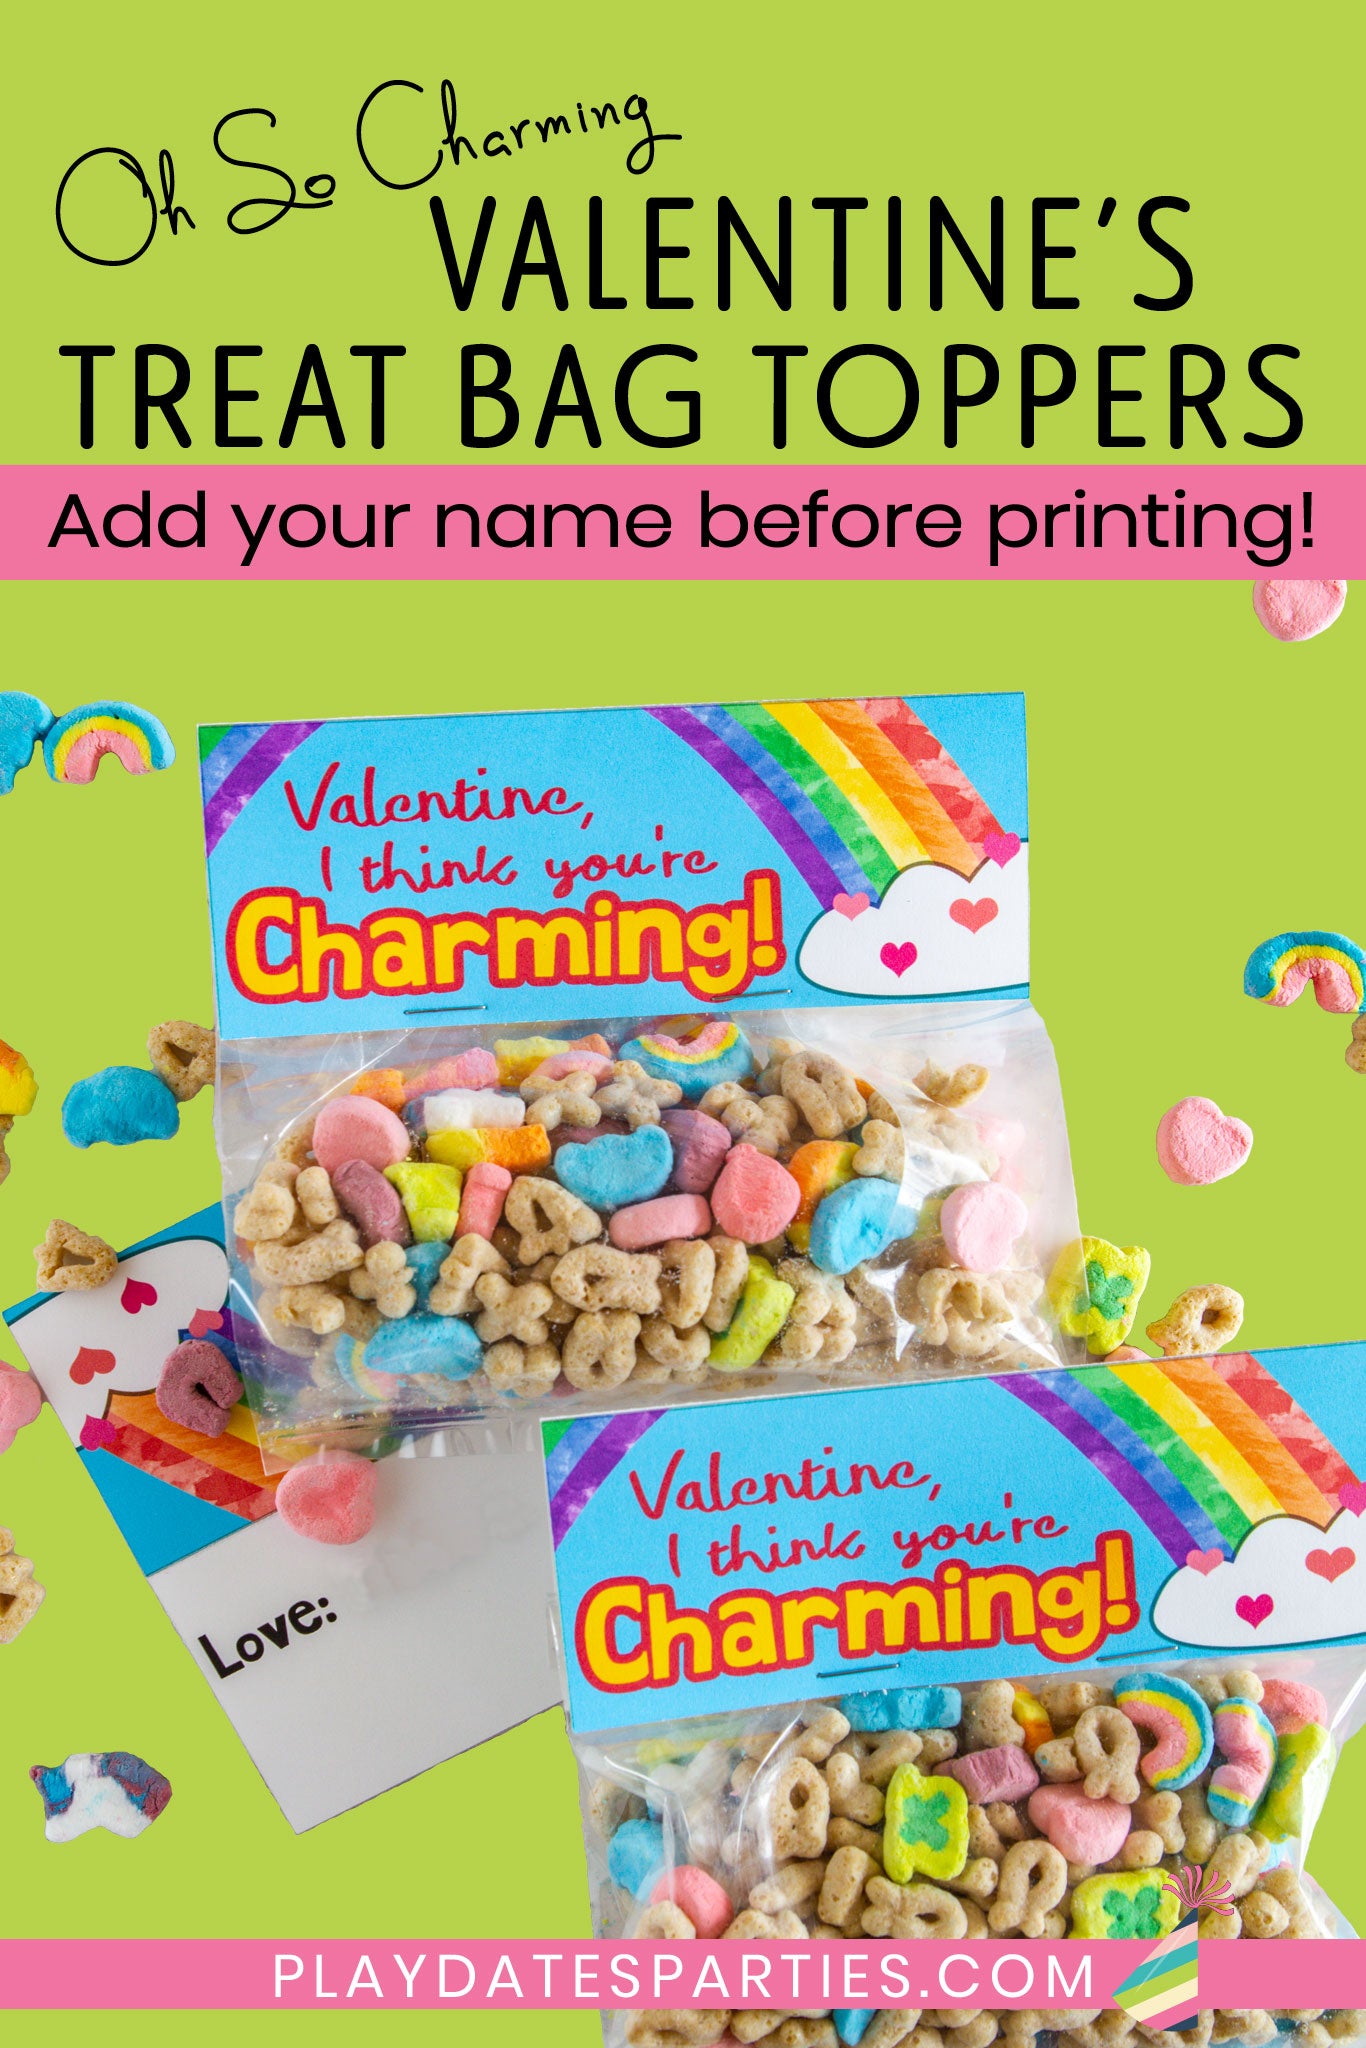 Oh So Charming Valentine's Day Treat Bag Toppers